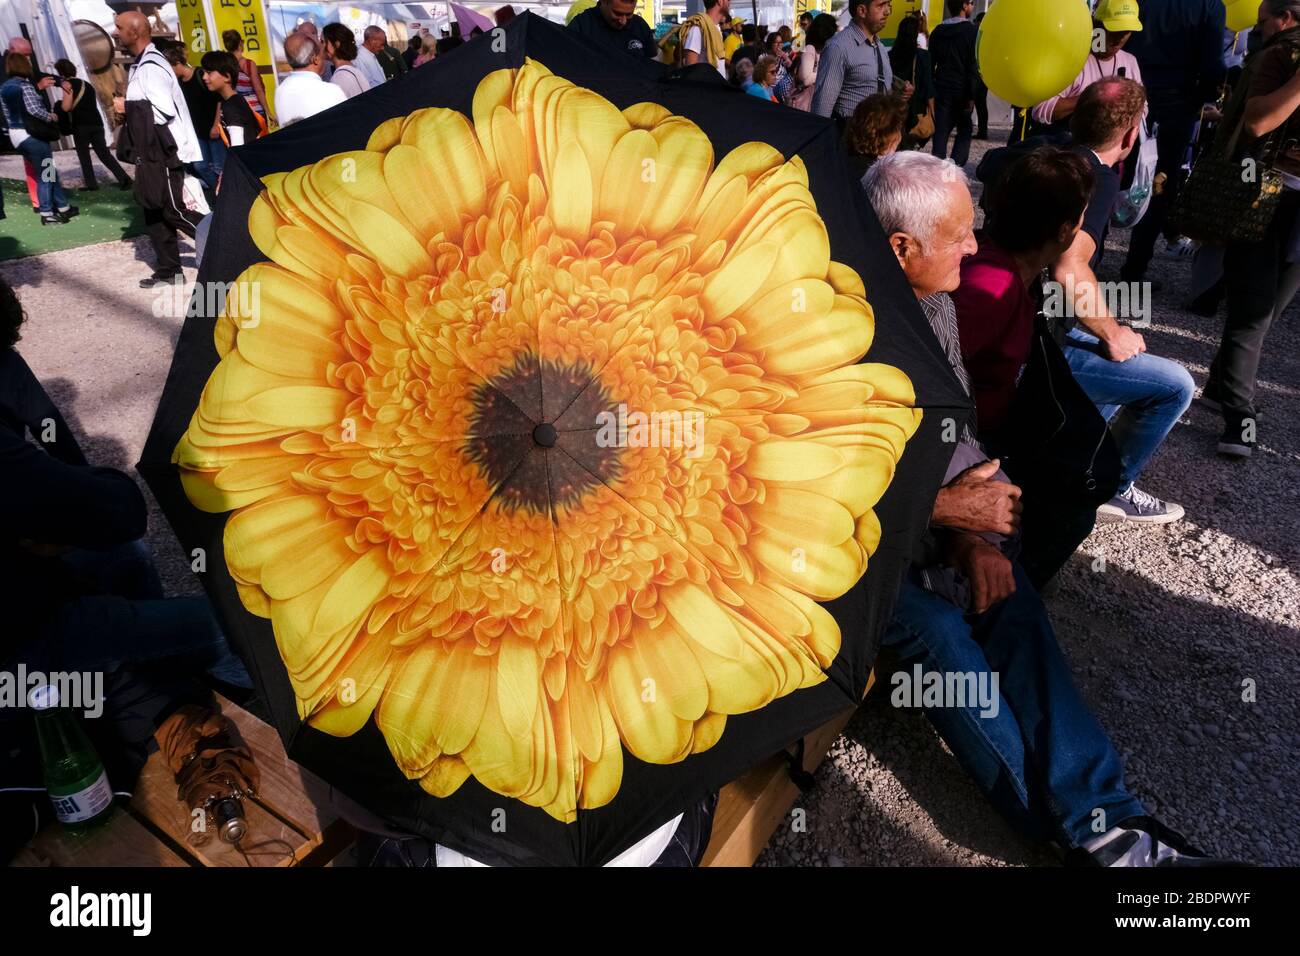 Elderly man sitting in the crowd in a sunny day. Parasol umbrella with a large yellow, orange flower, in the foreground. Stock Photo